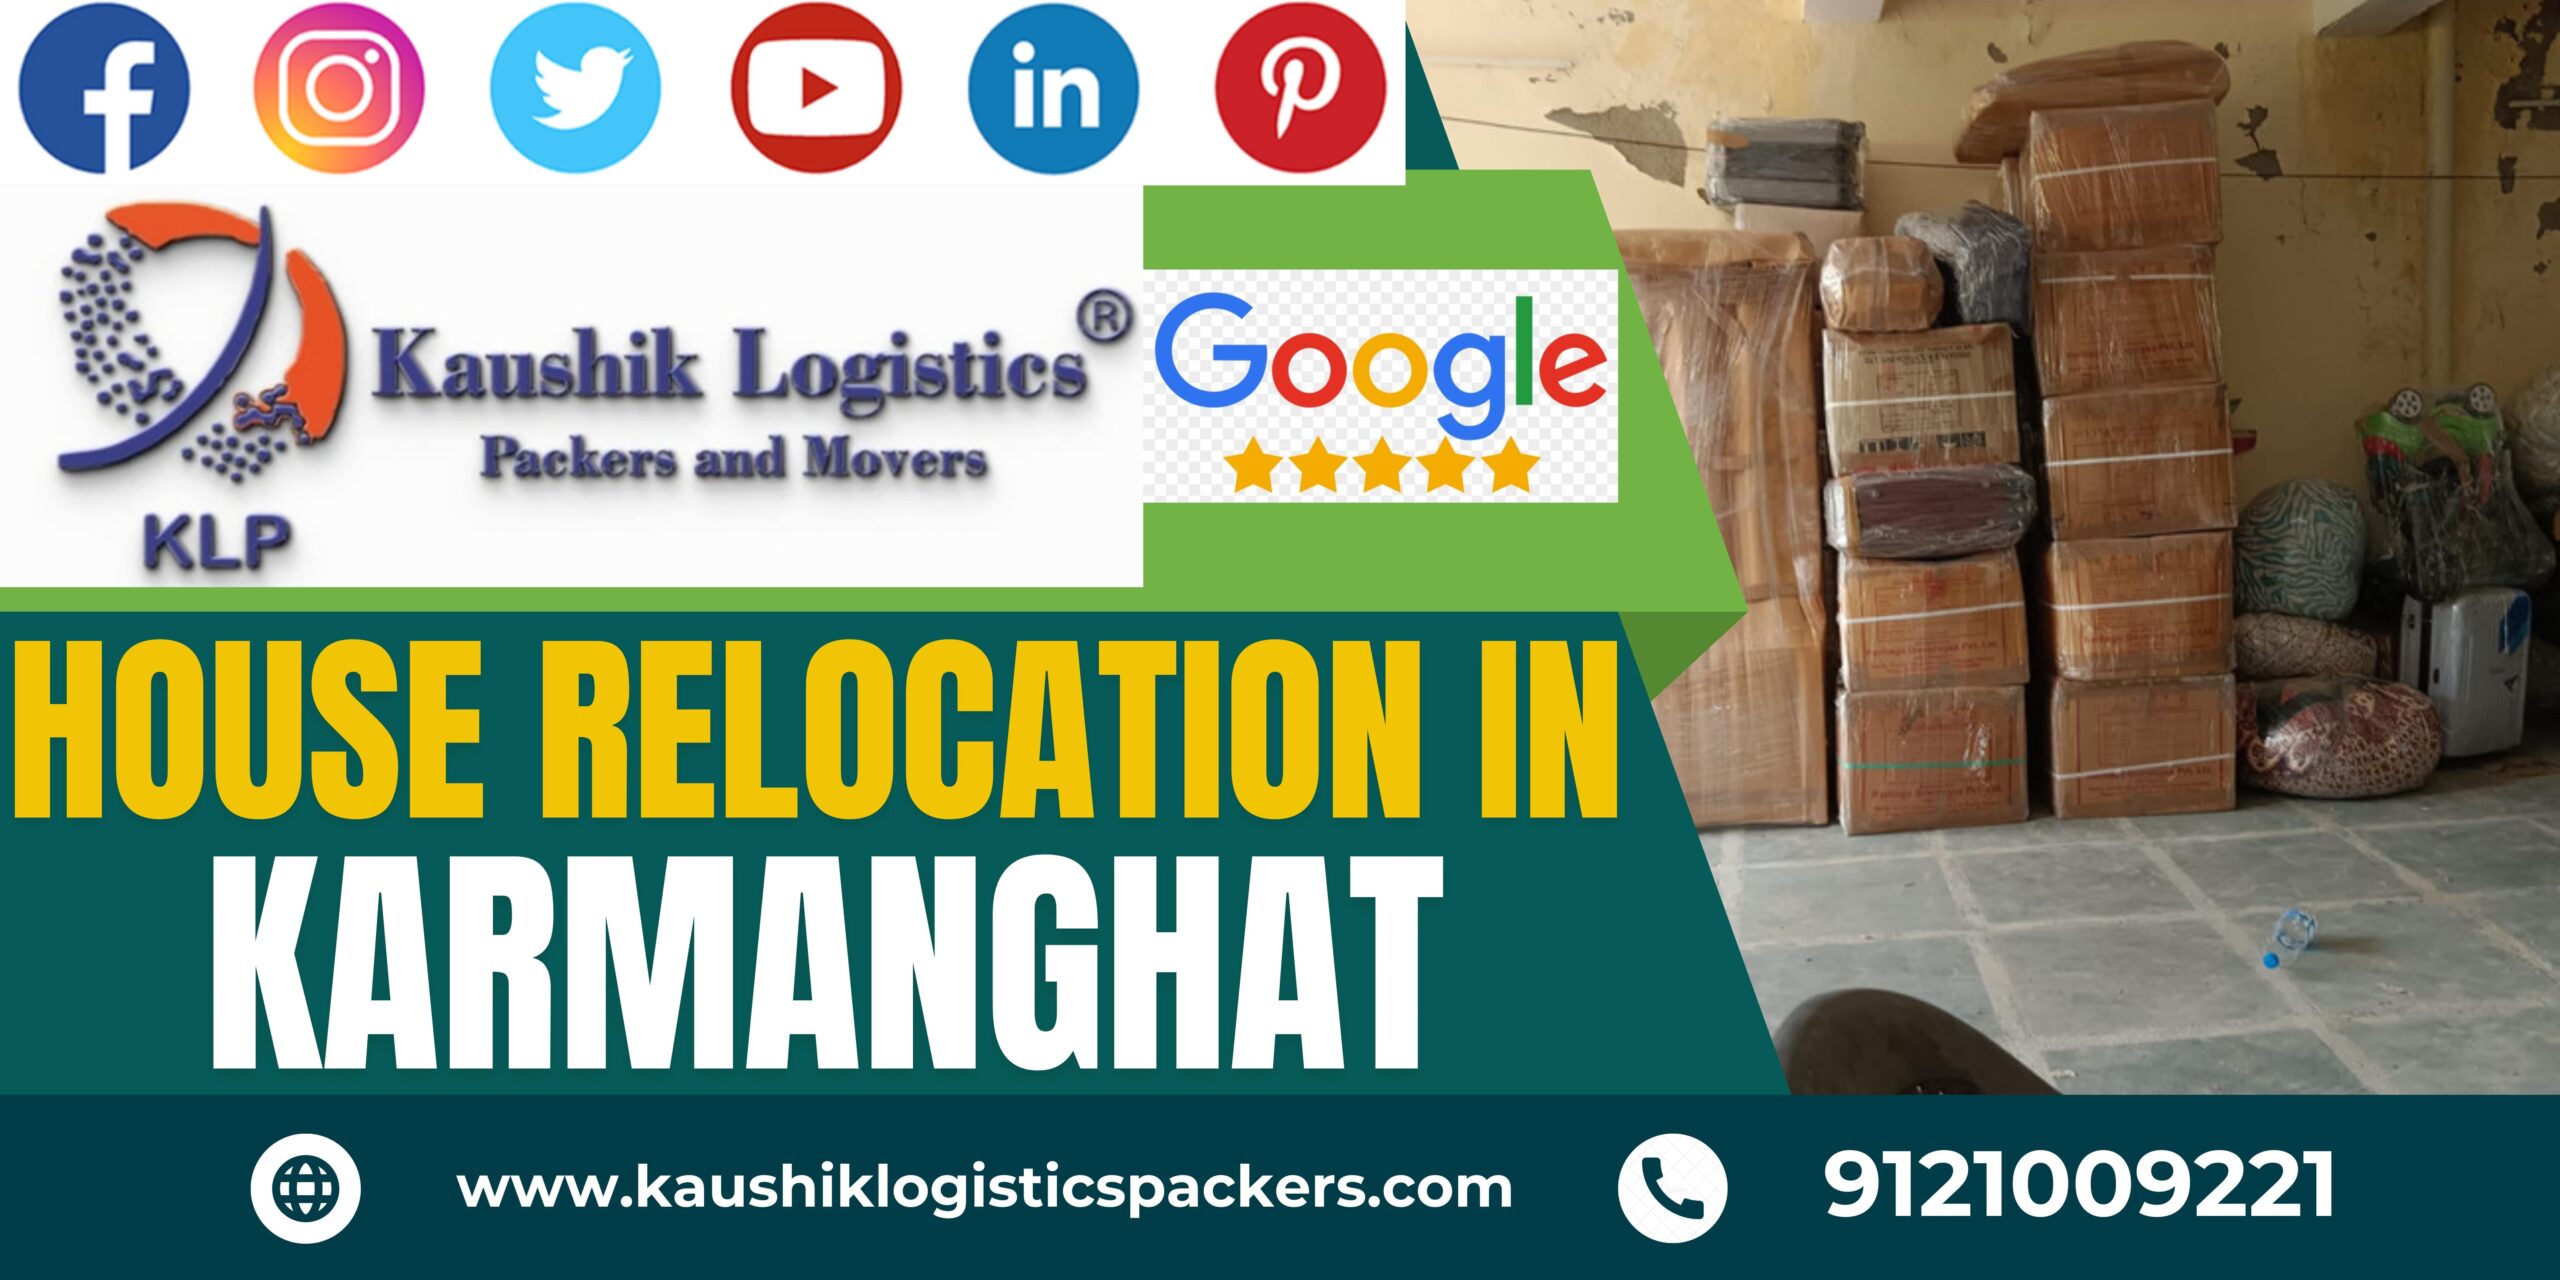 Packers and Movers In Karmanghat